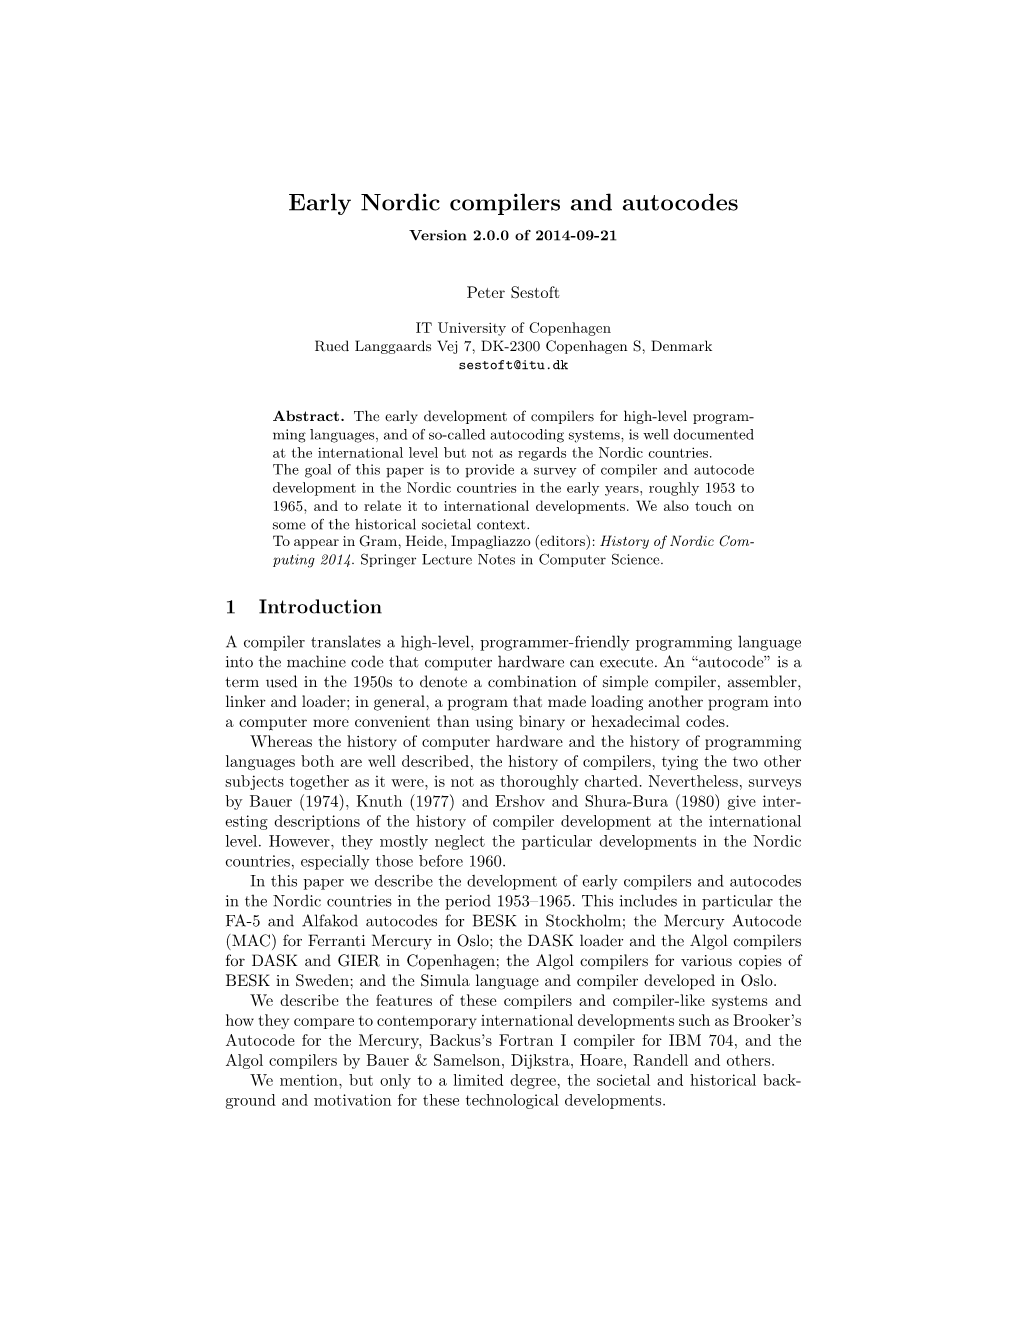 Early Nordic Compilers and Autocodes Version 2.0.0 of 2014-09-21